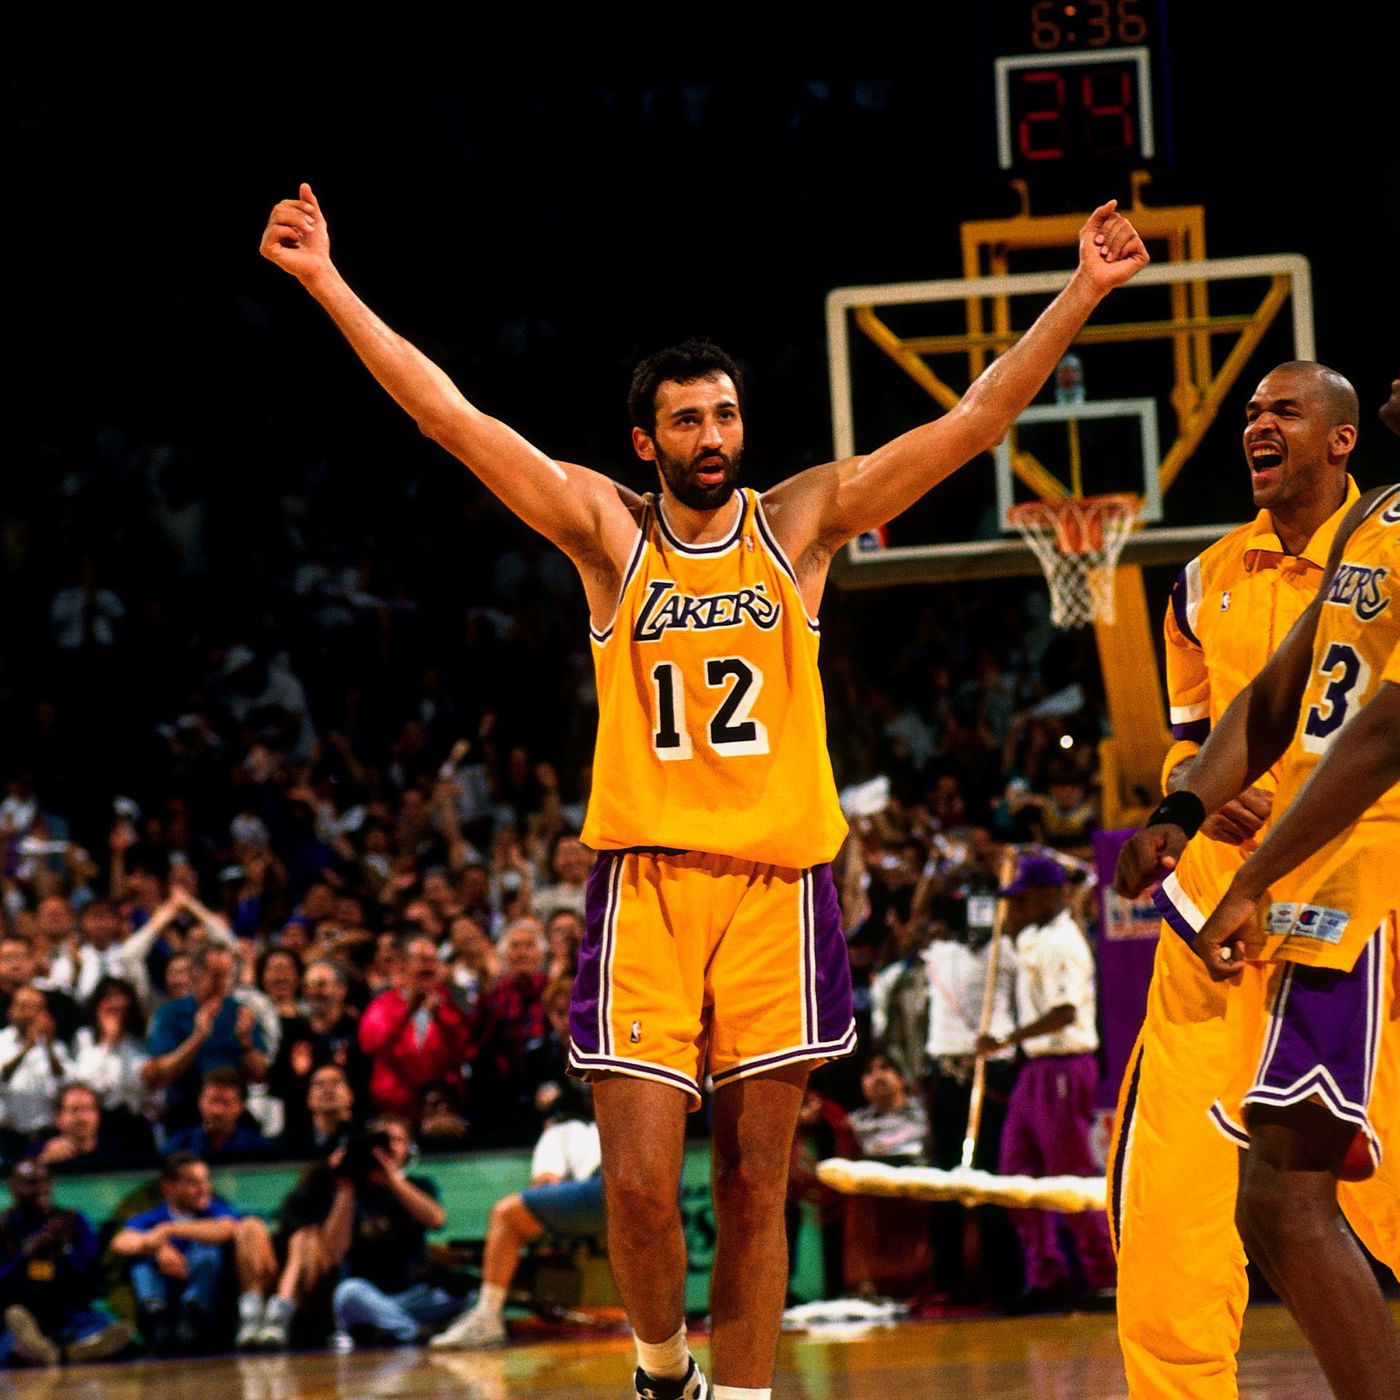 Lakers Profile: Vlade Divac was more than the guy traded for Kobe